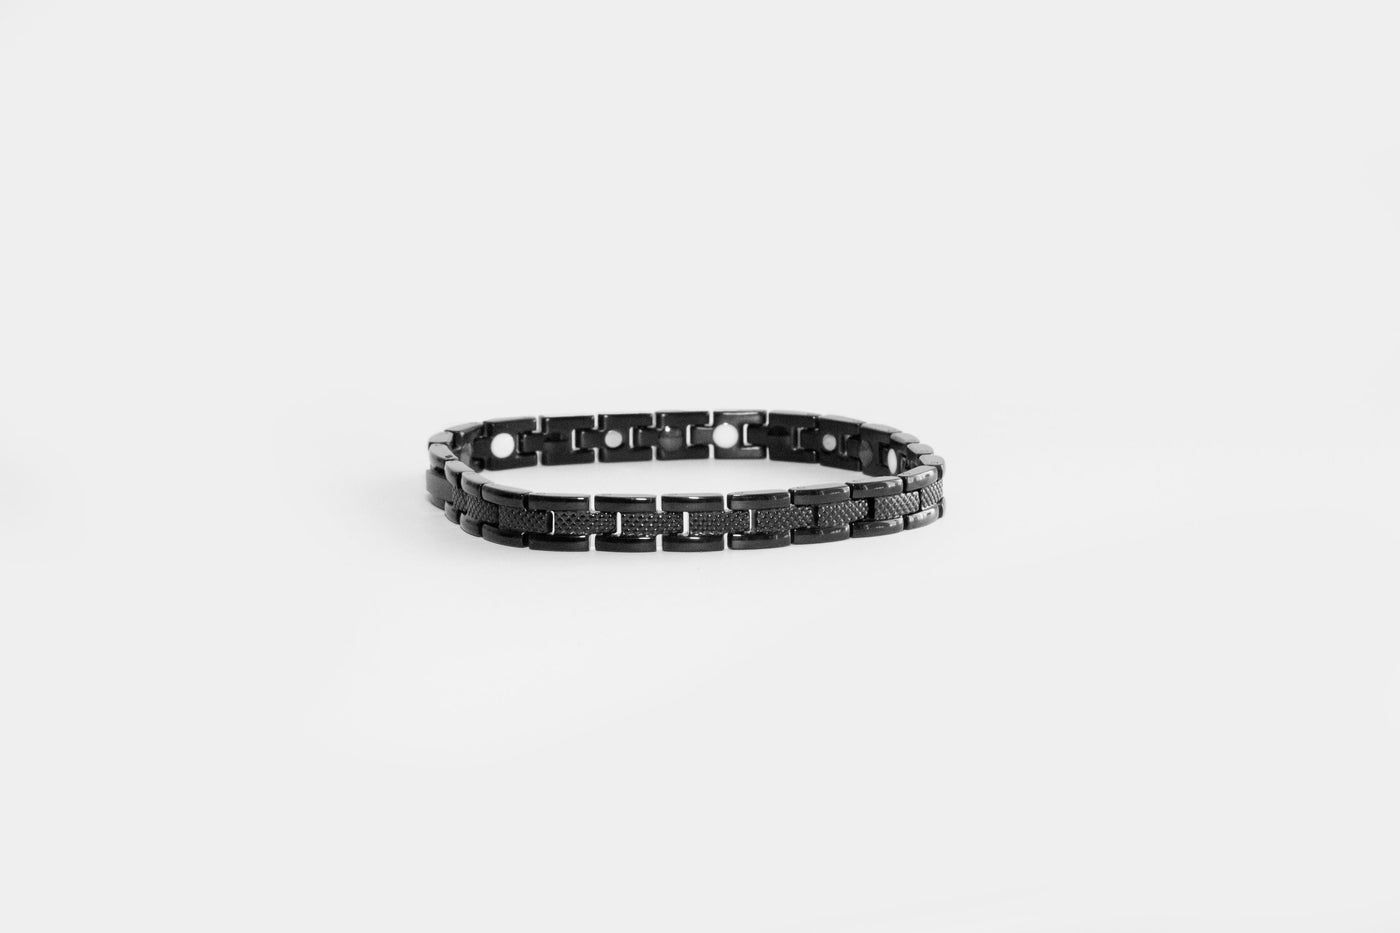 Carlton London Fir Infrared Bracelet - Get Best Price from Manufacturers &  Suppliers in India